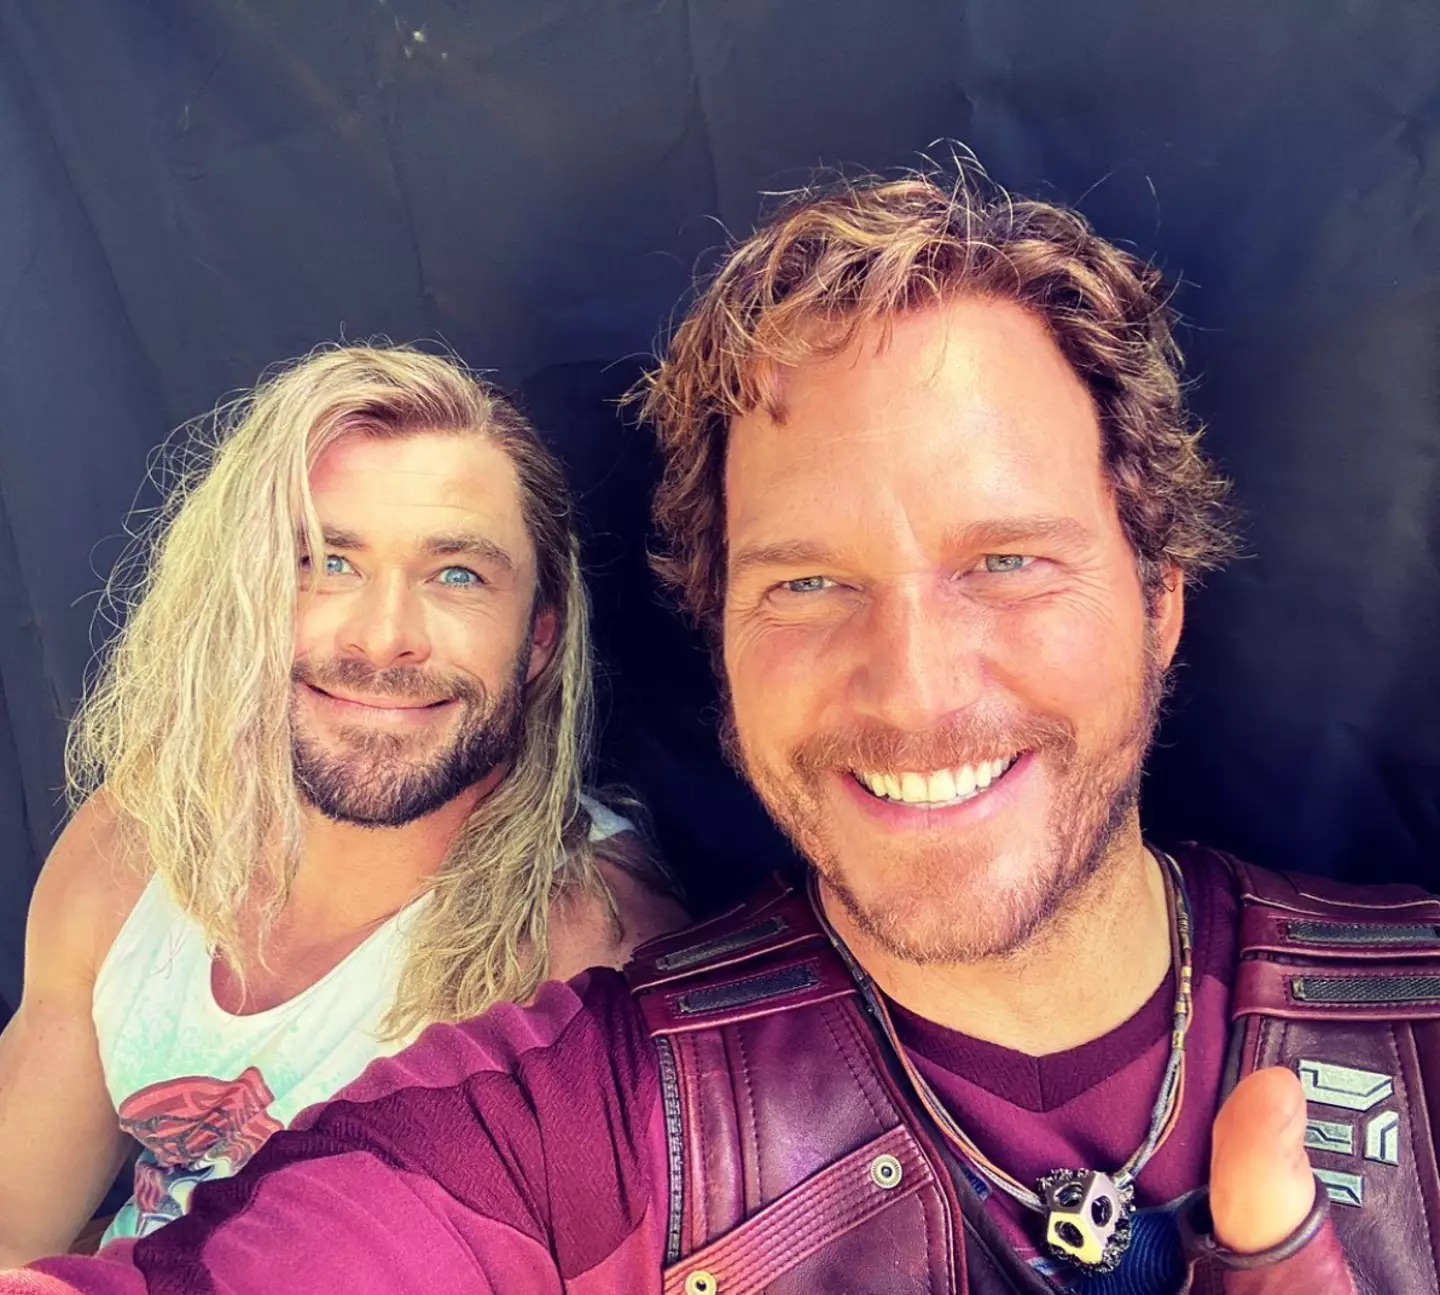 Hemsworth shared a birthday message to the Guardians of the Galaxy star - but it came with a twist.